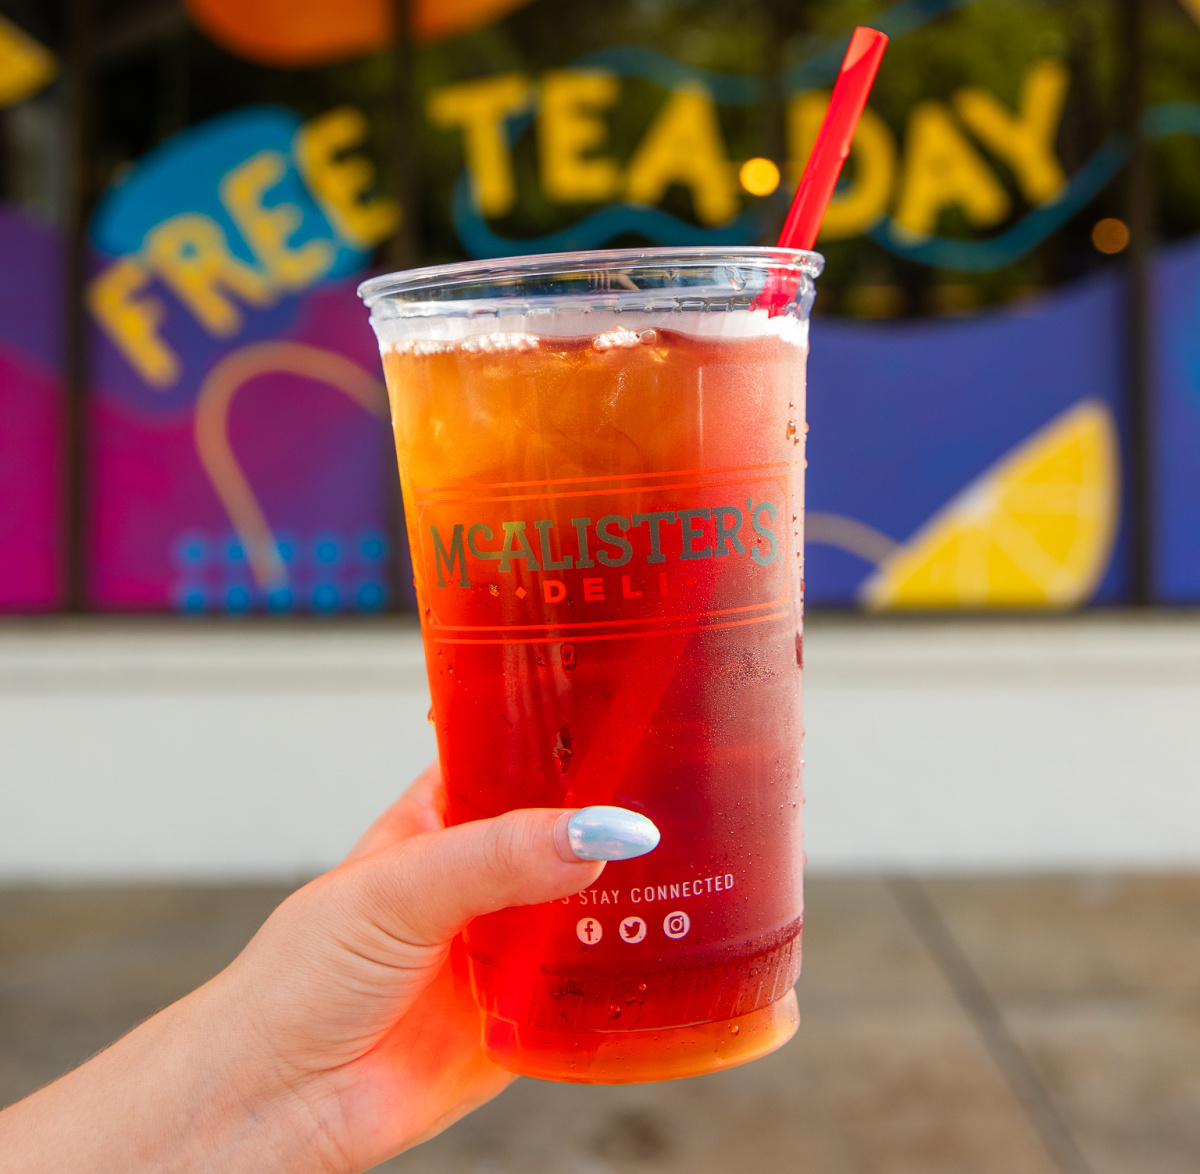 McAlister’s Deli FREE Tea Day (Order up to 4 for FREE!)